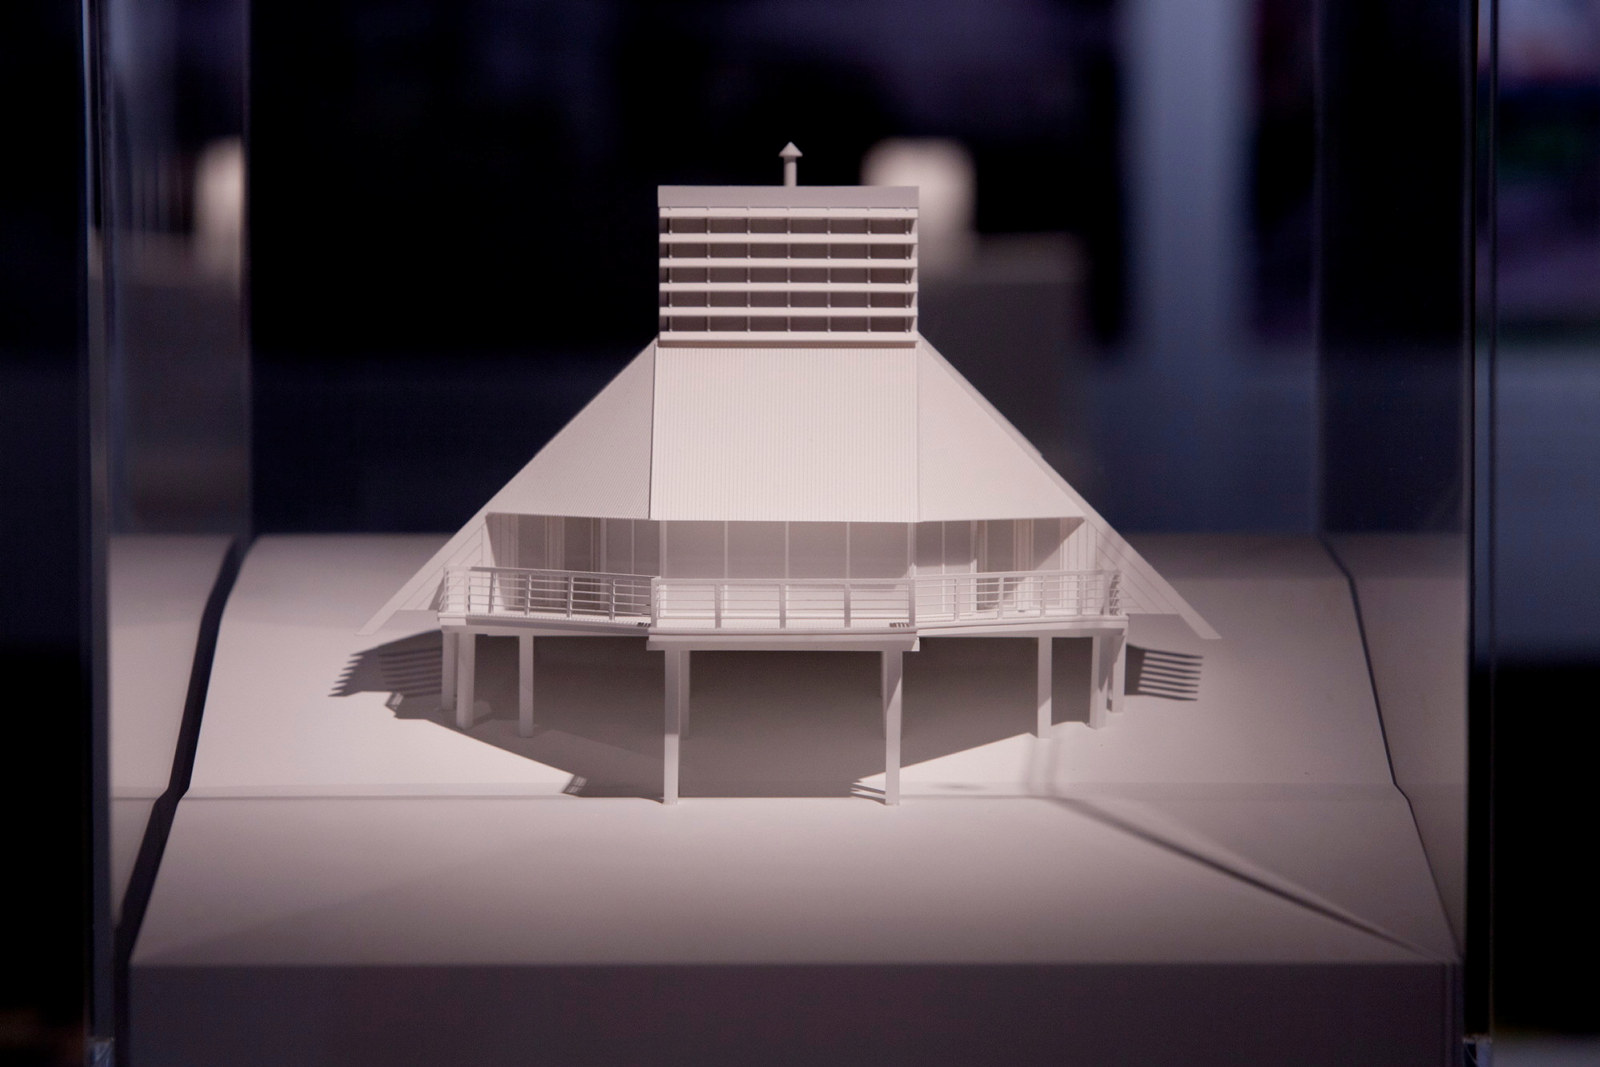 This is a detail photograph of a white architectural model of a house